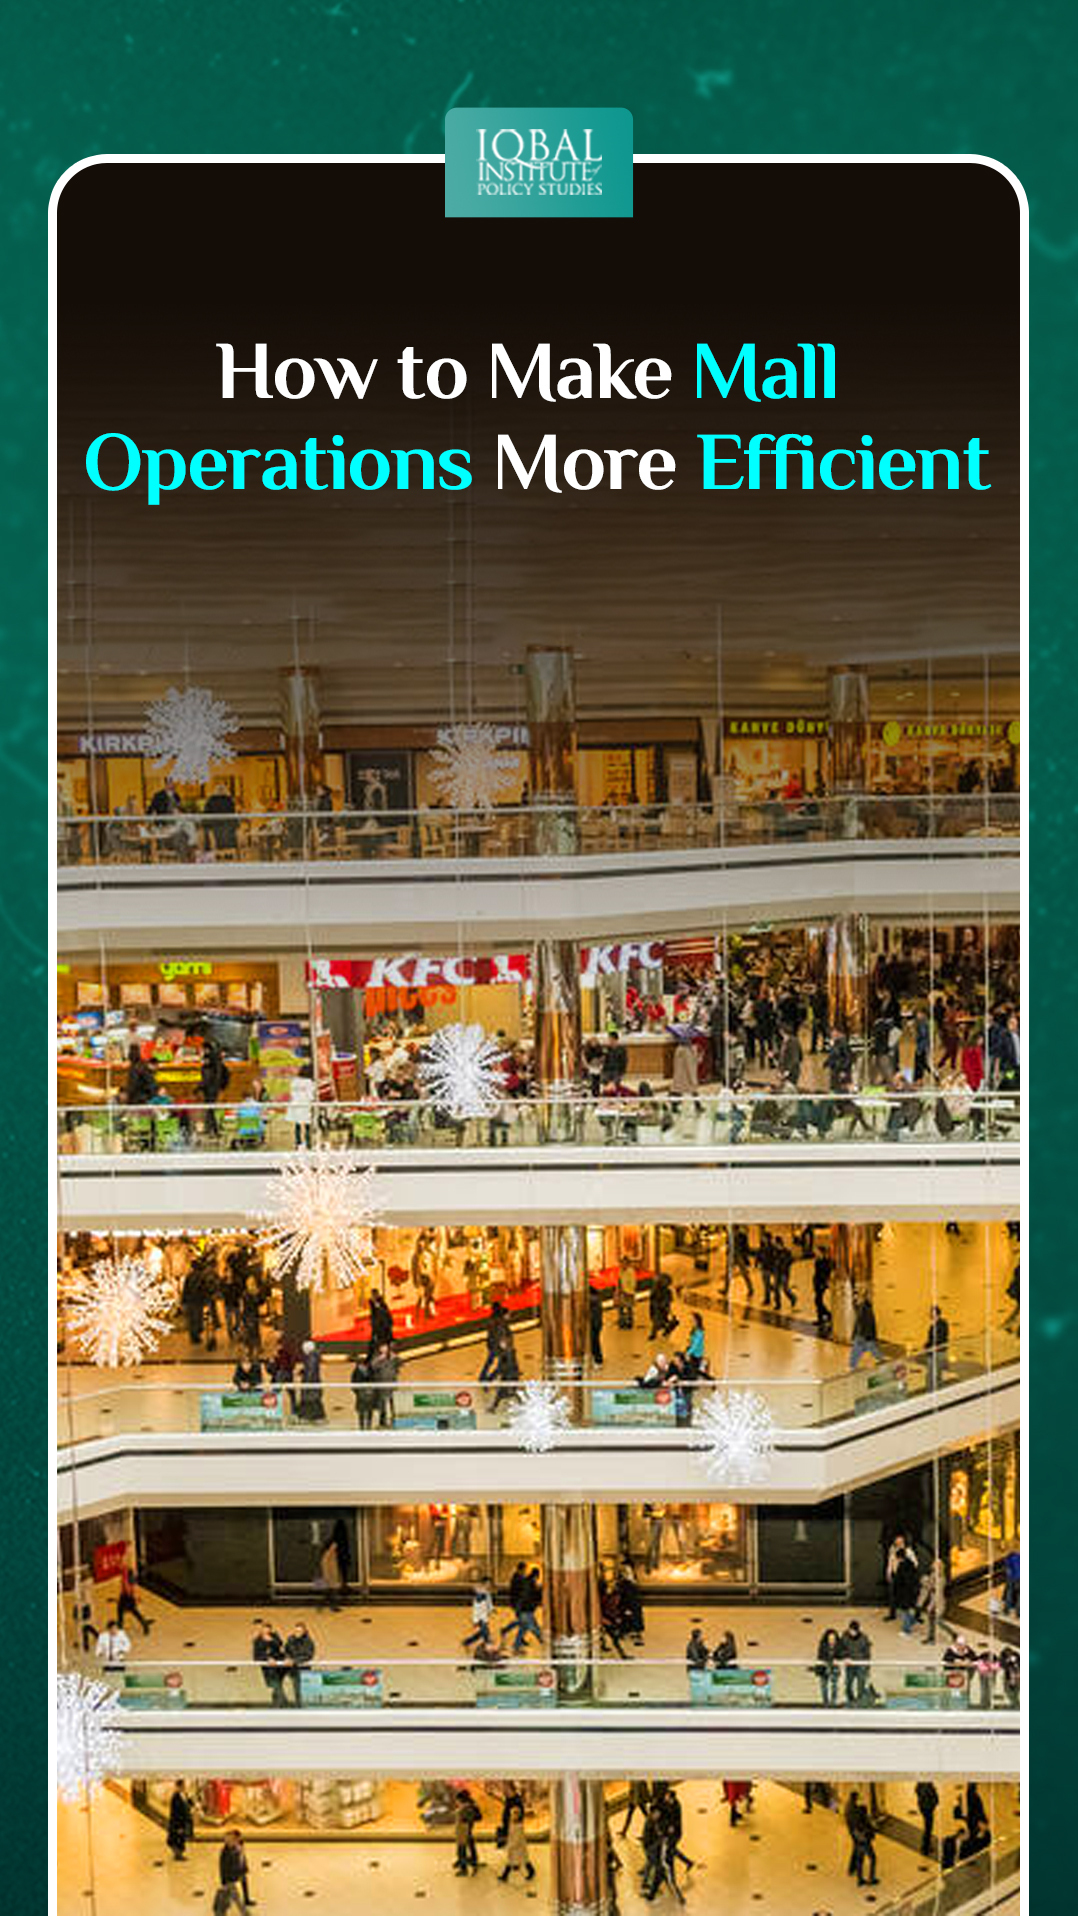 How to Make Mall Operations More Efficient?